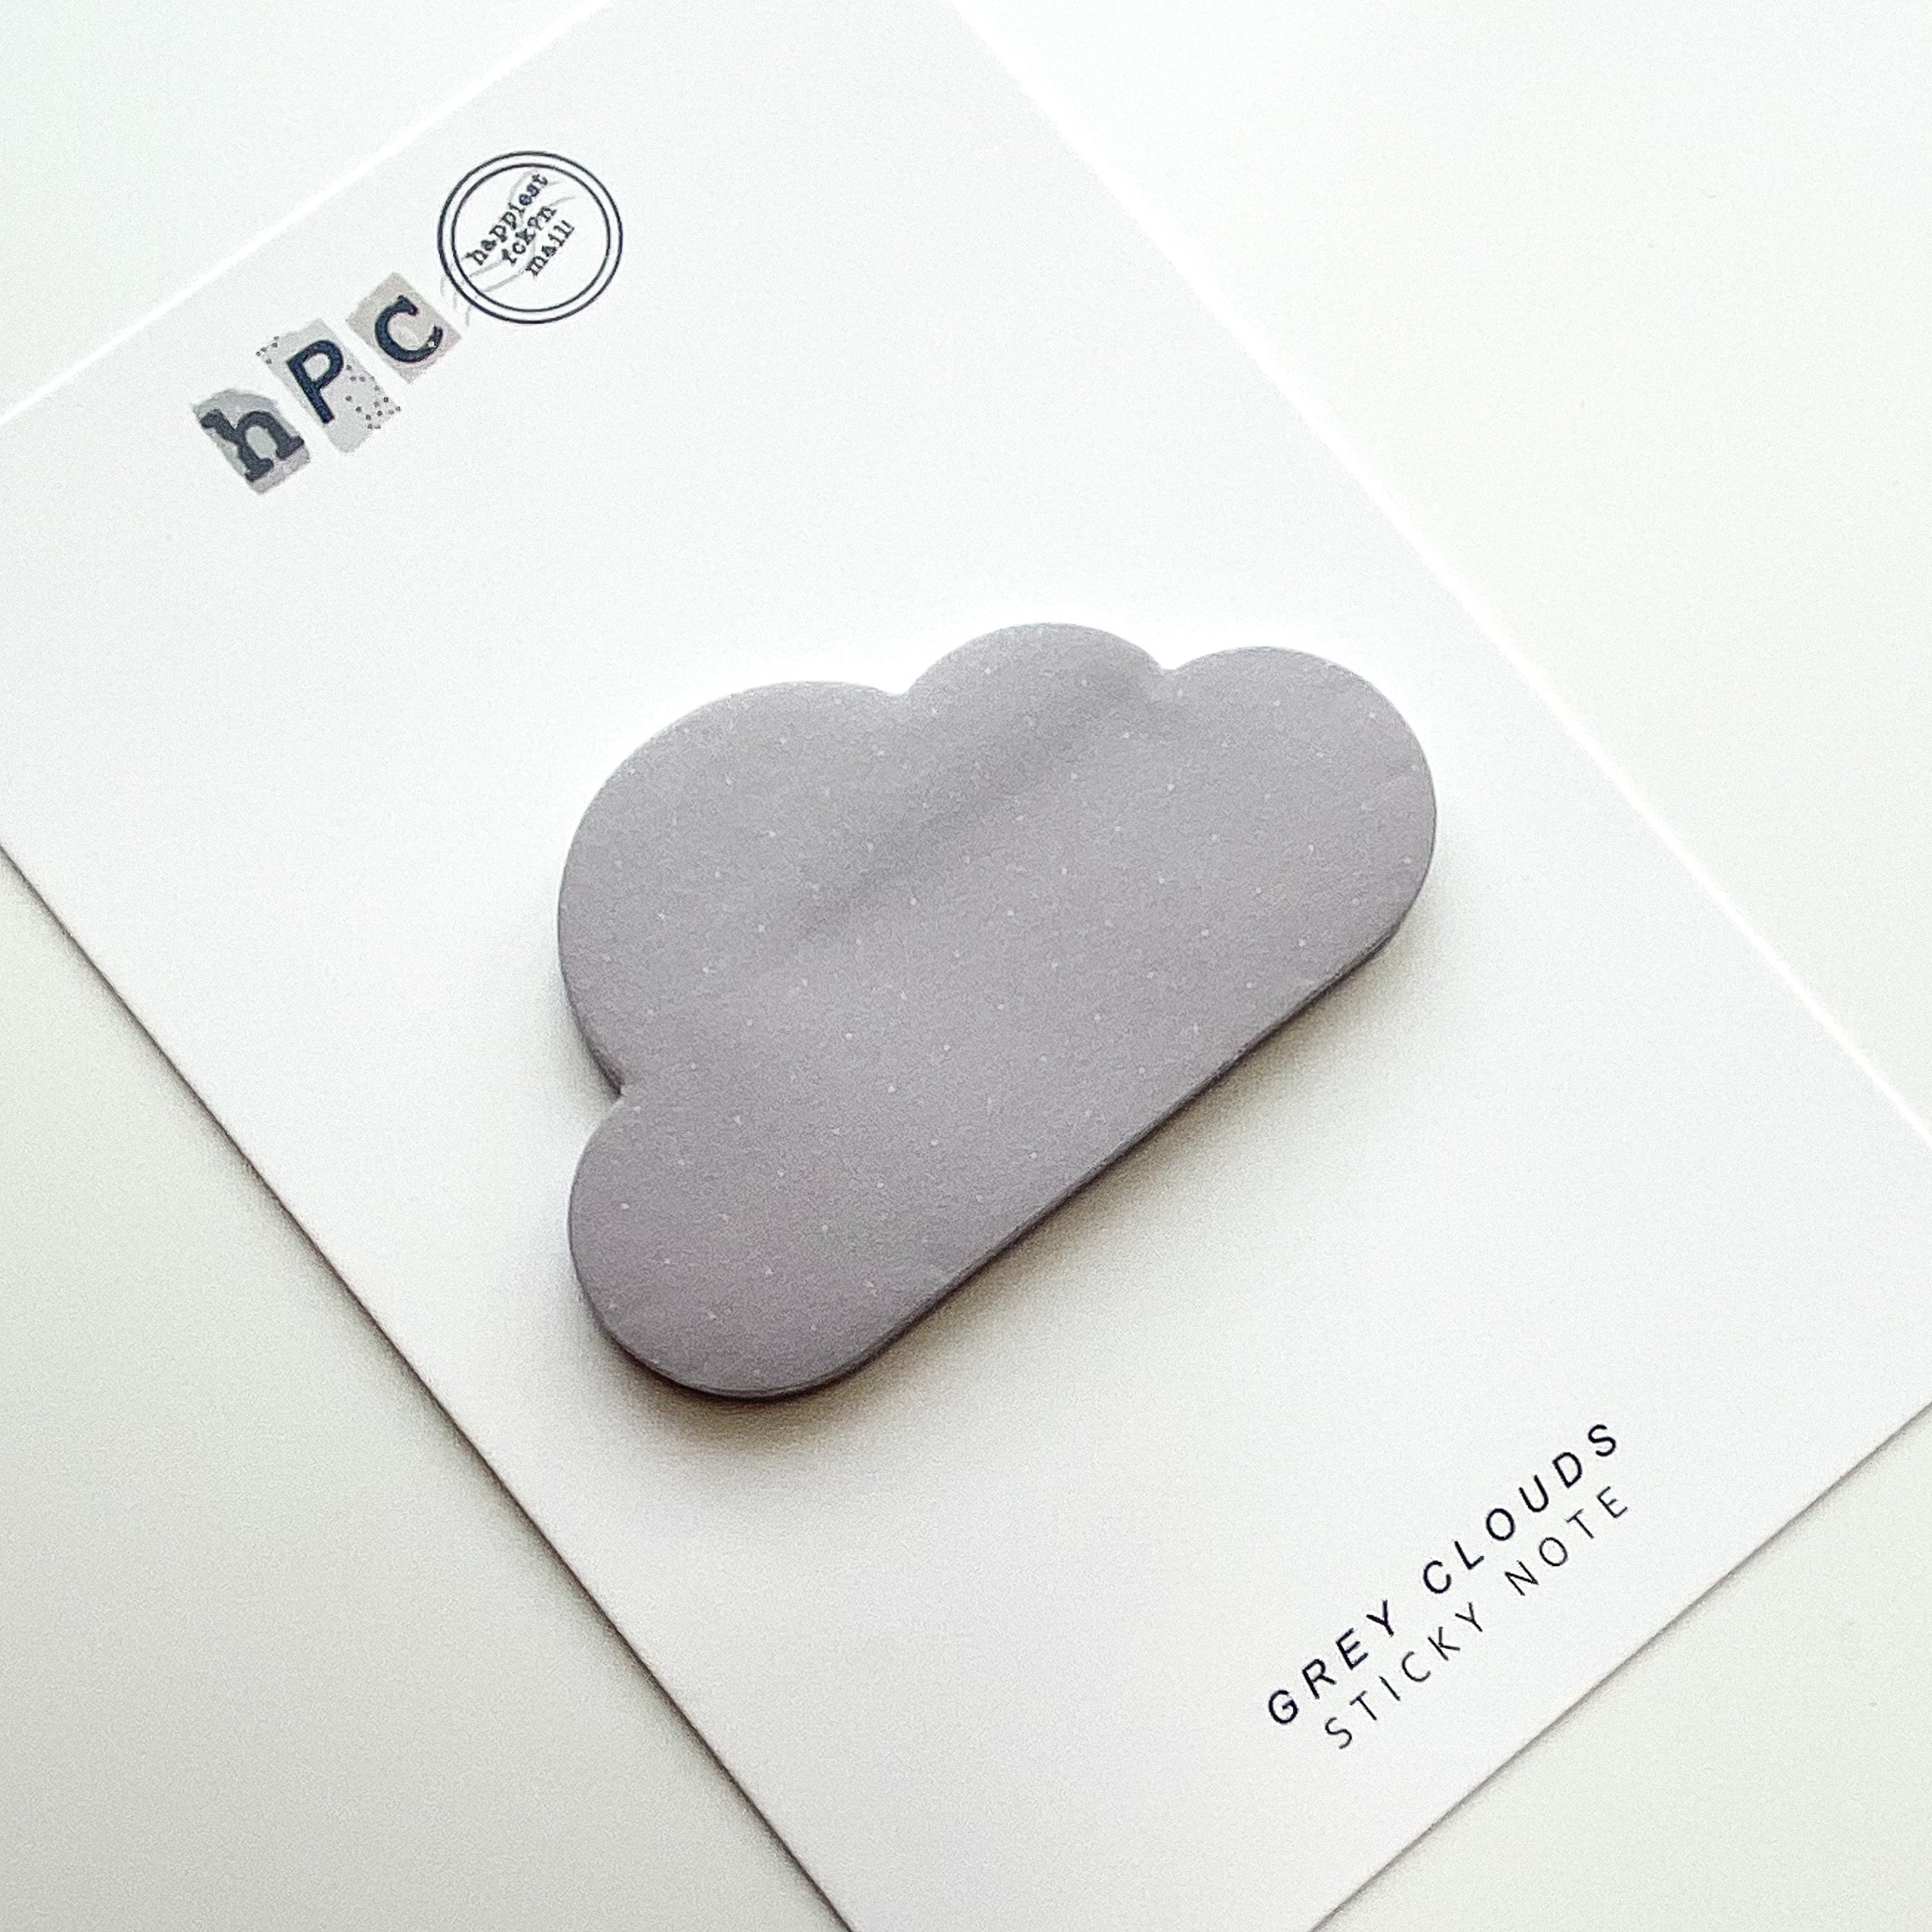 Cloud Sticky Notes Different Colors Shape Stock Photo 585317426